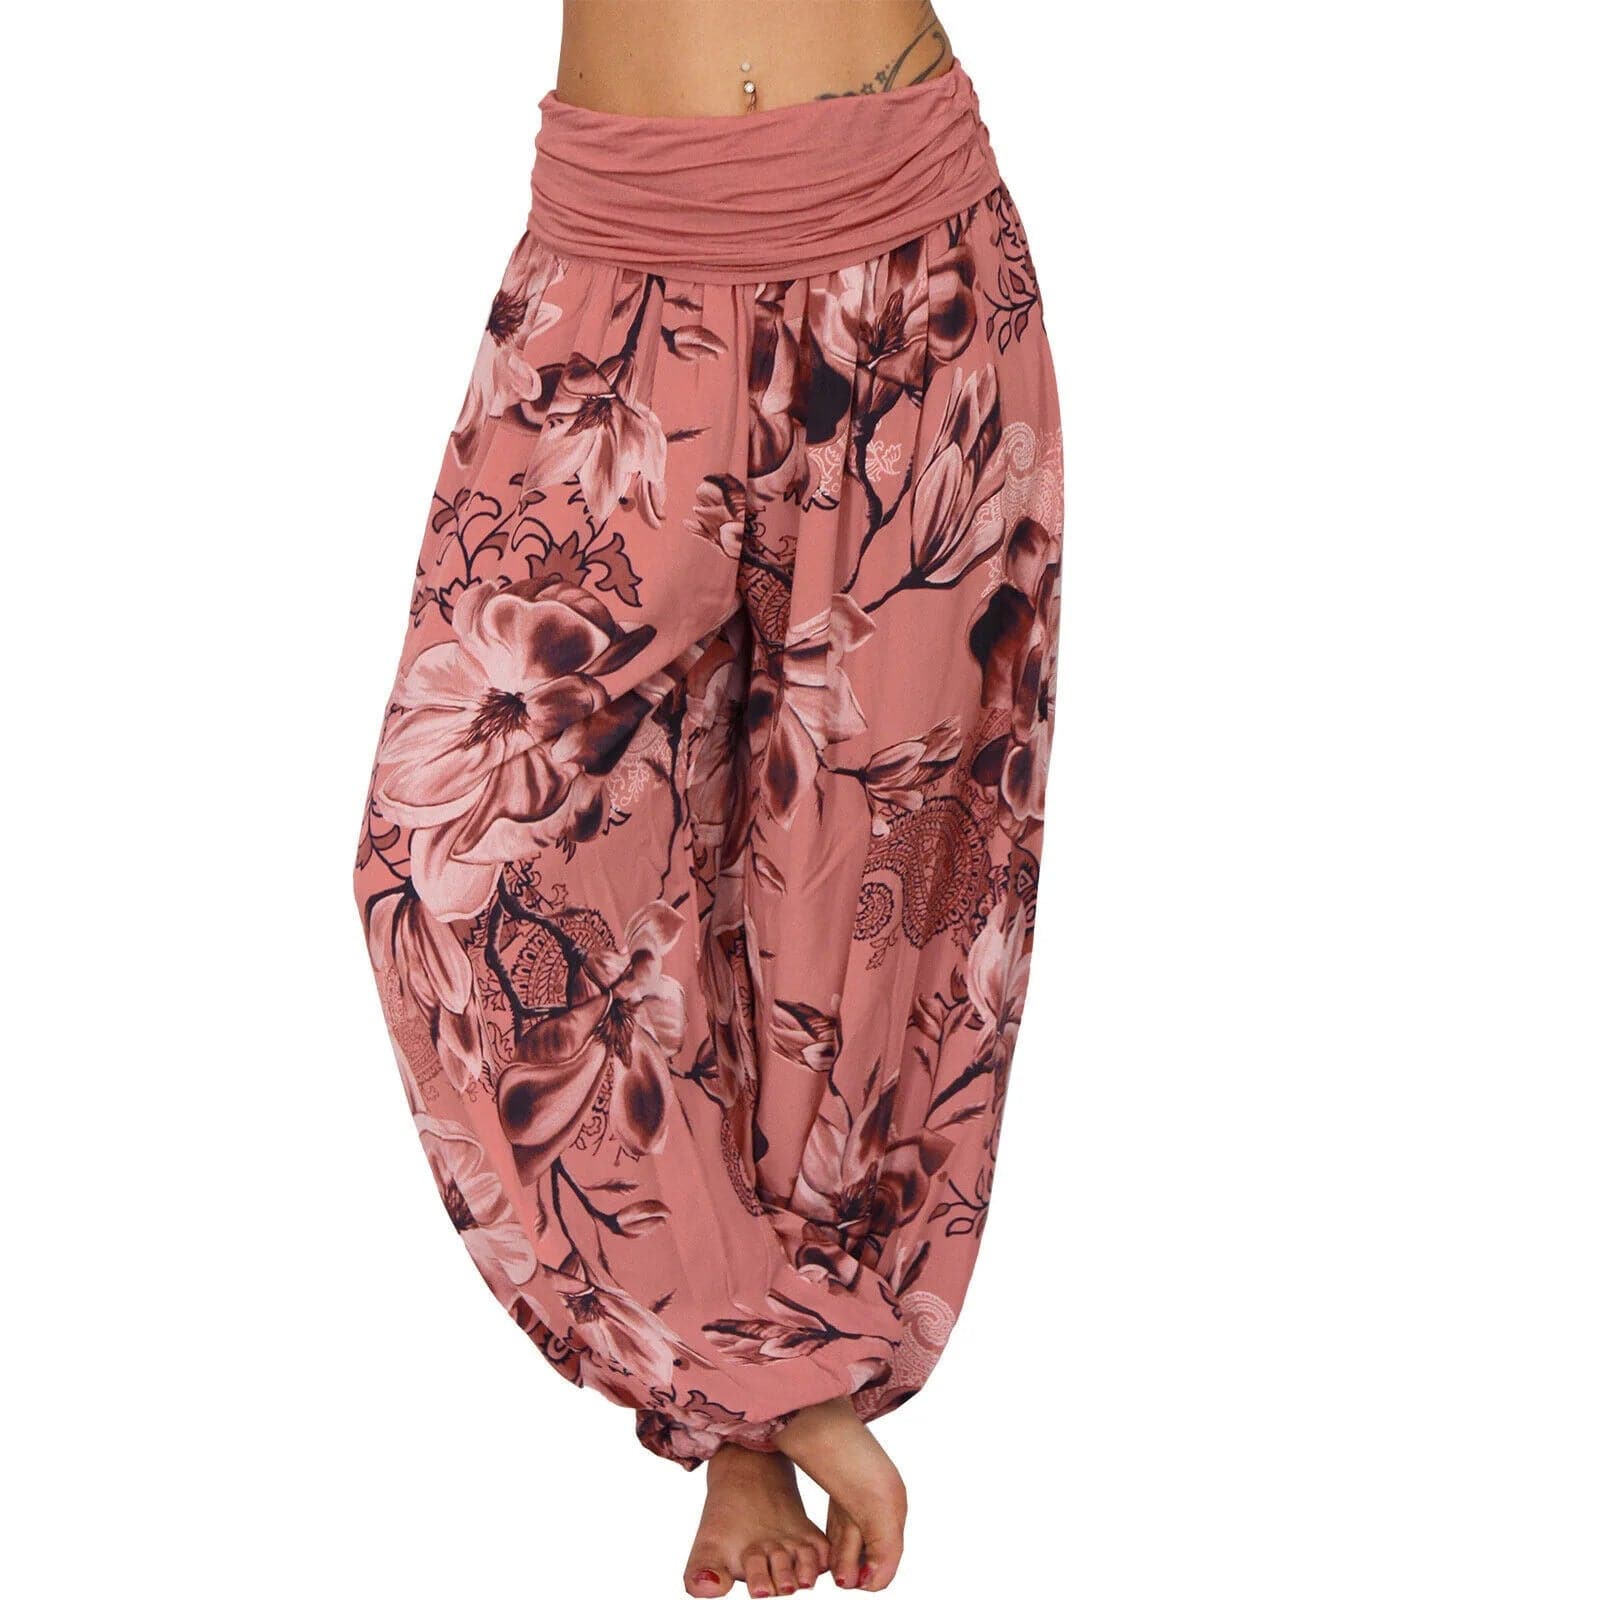 Casual Wide Leg Harem Pants - Cotton Polyester Blend, Elastic Waist, Loose Fit, Full Length - Wandering Woman